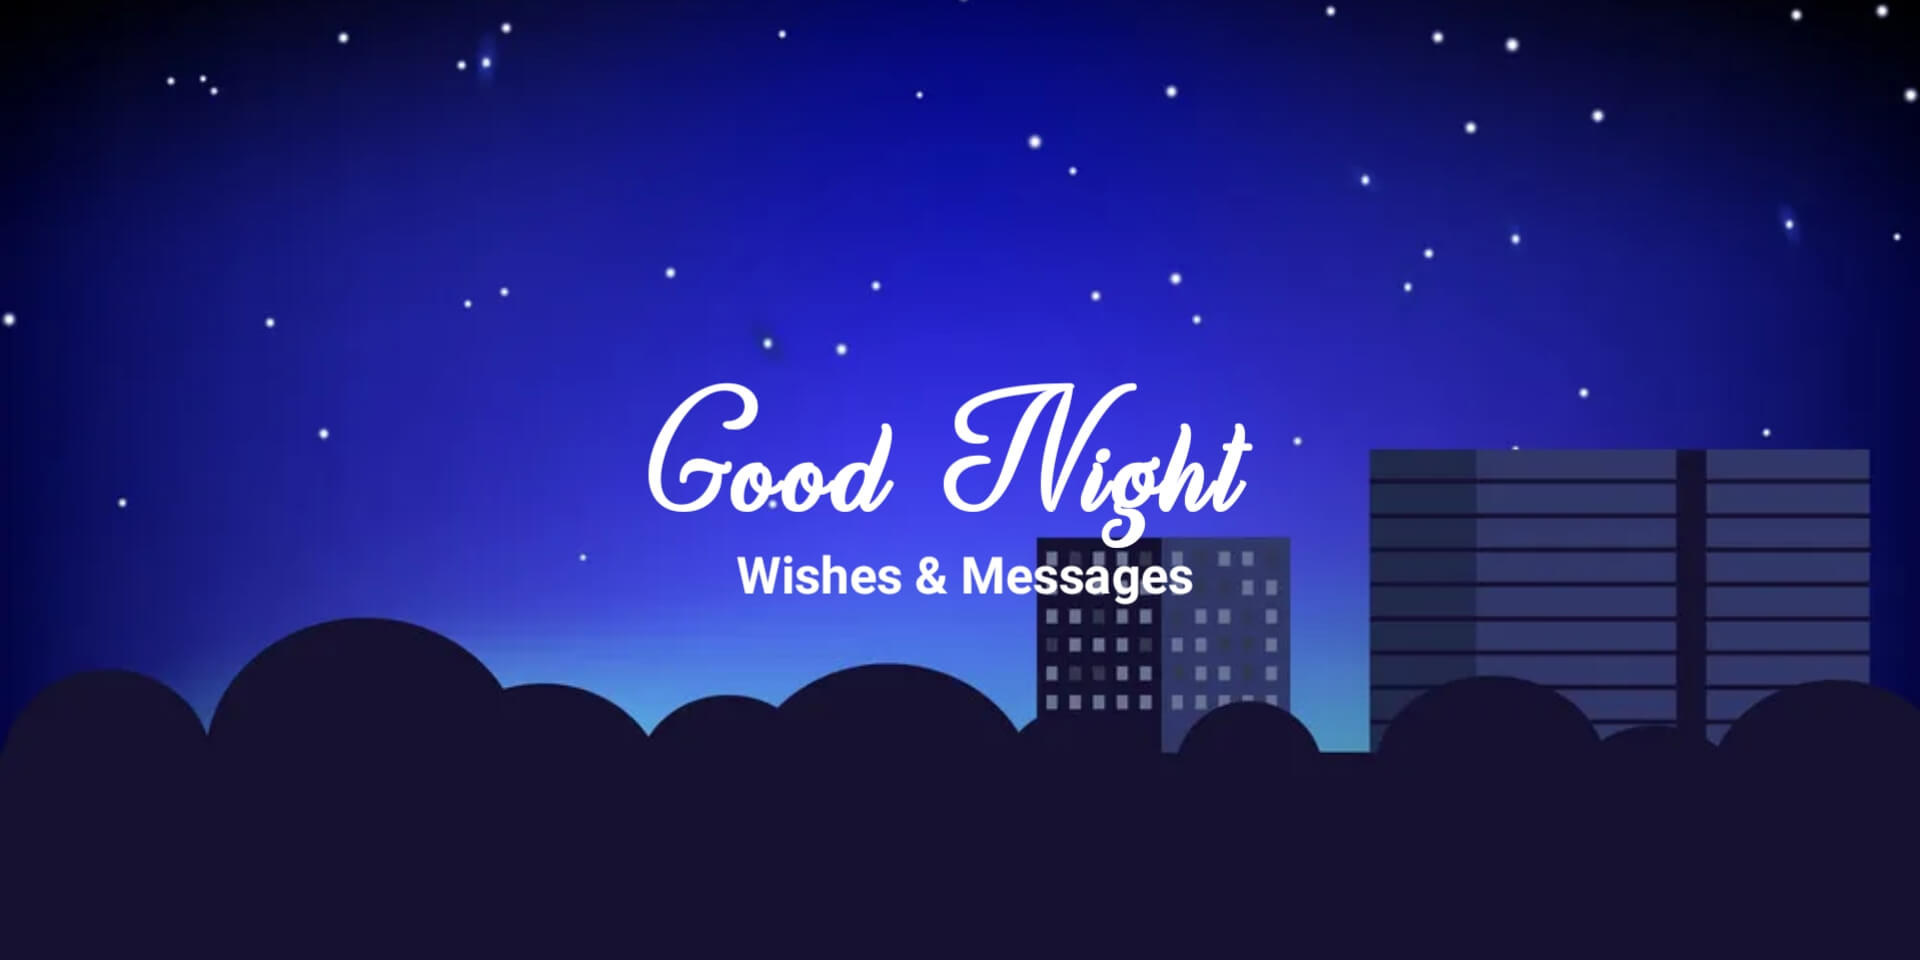 Good Night Wishes & Messages